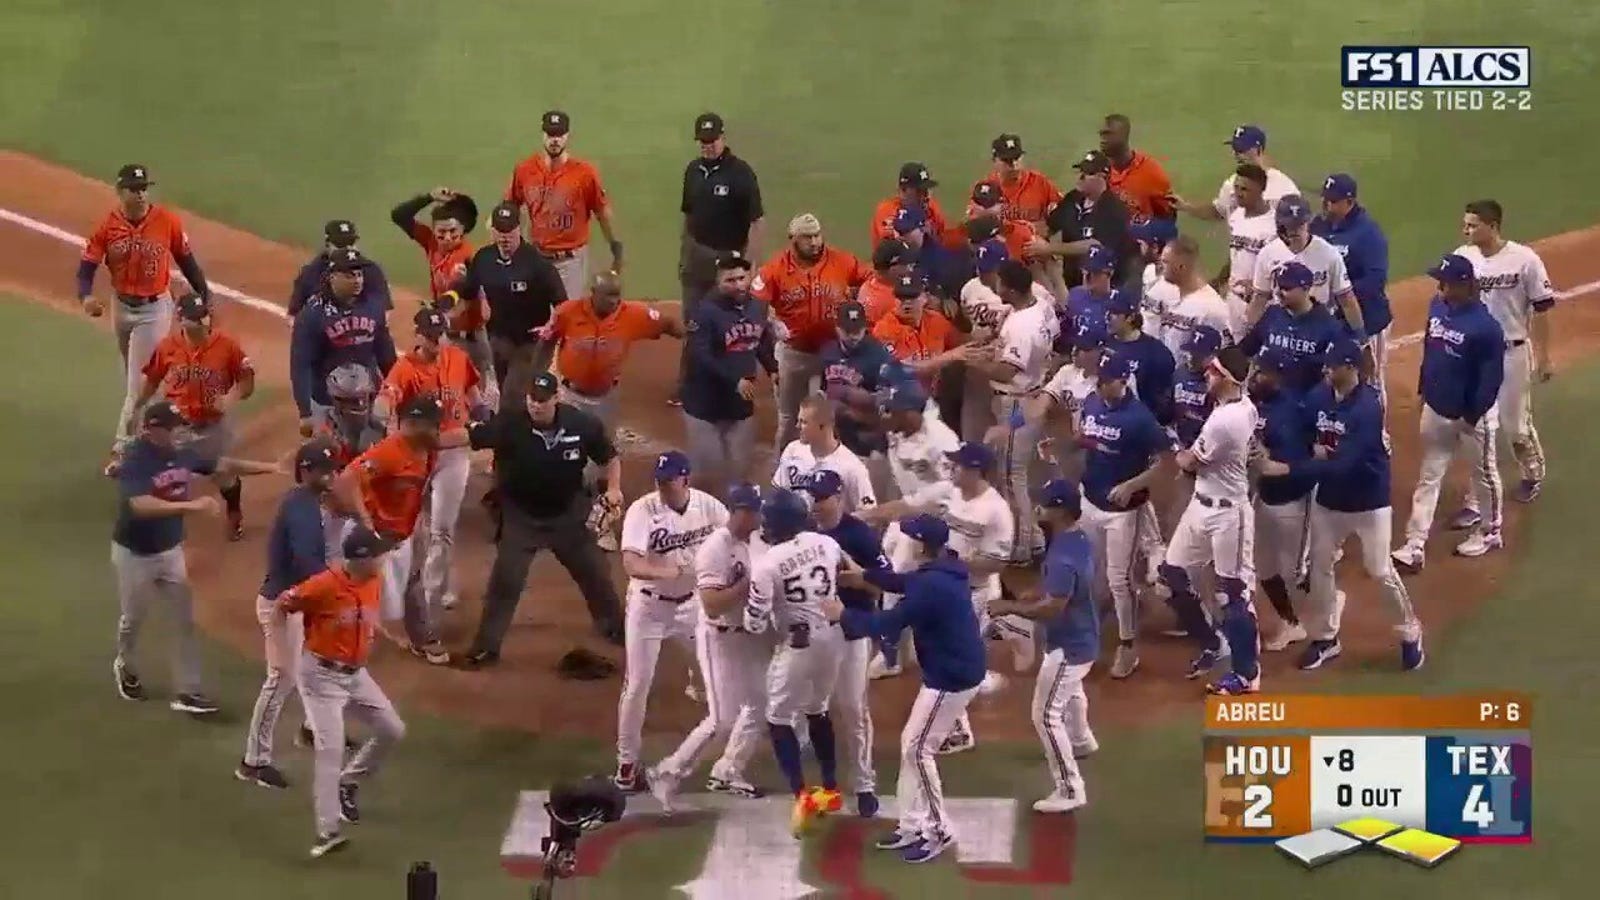 Benches clear between Astros and Rangers after Adolis García HBP